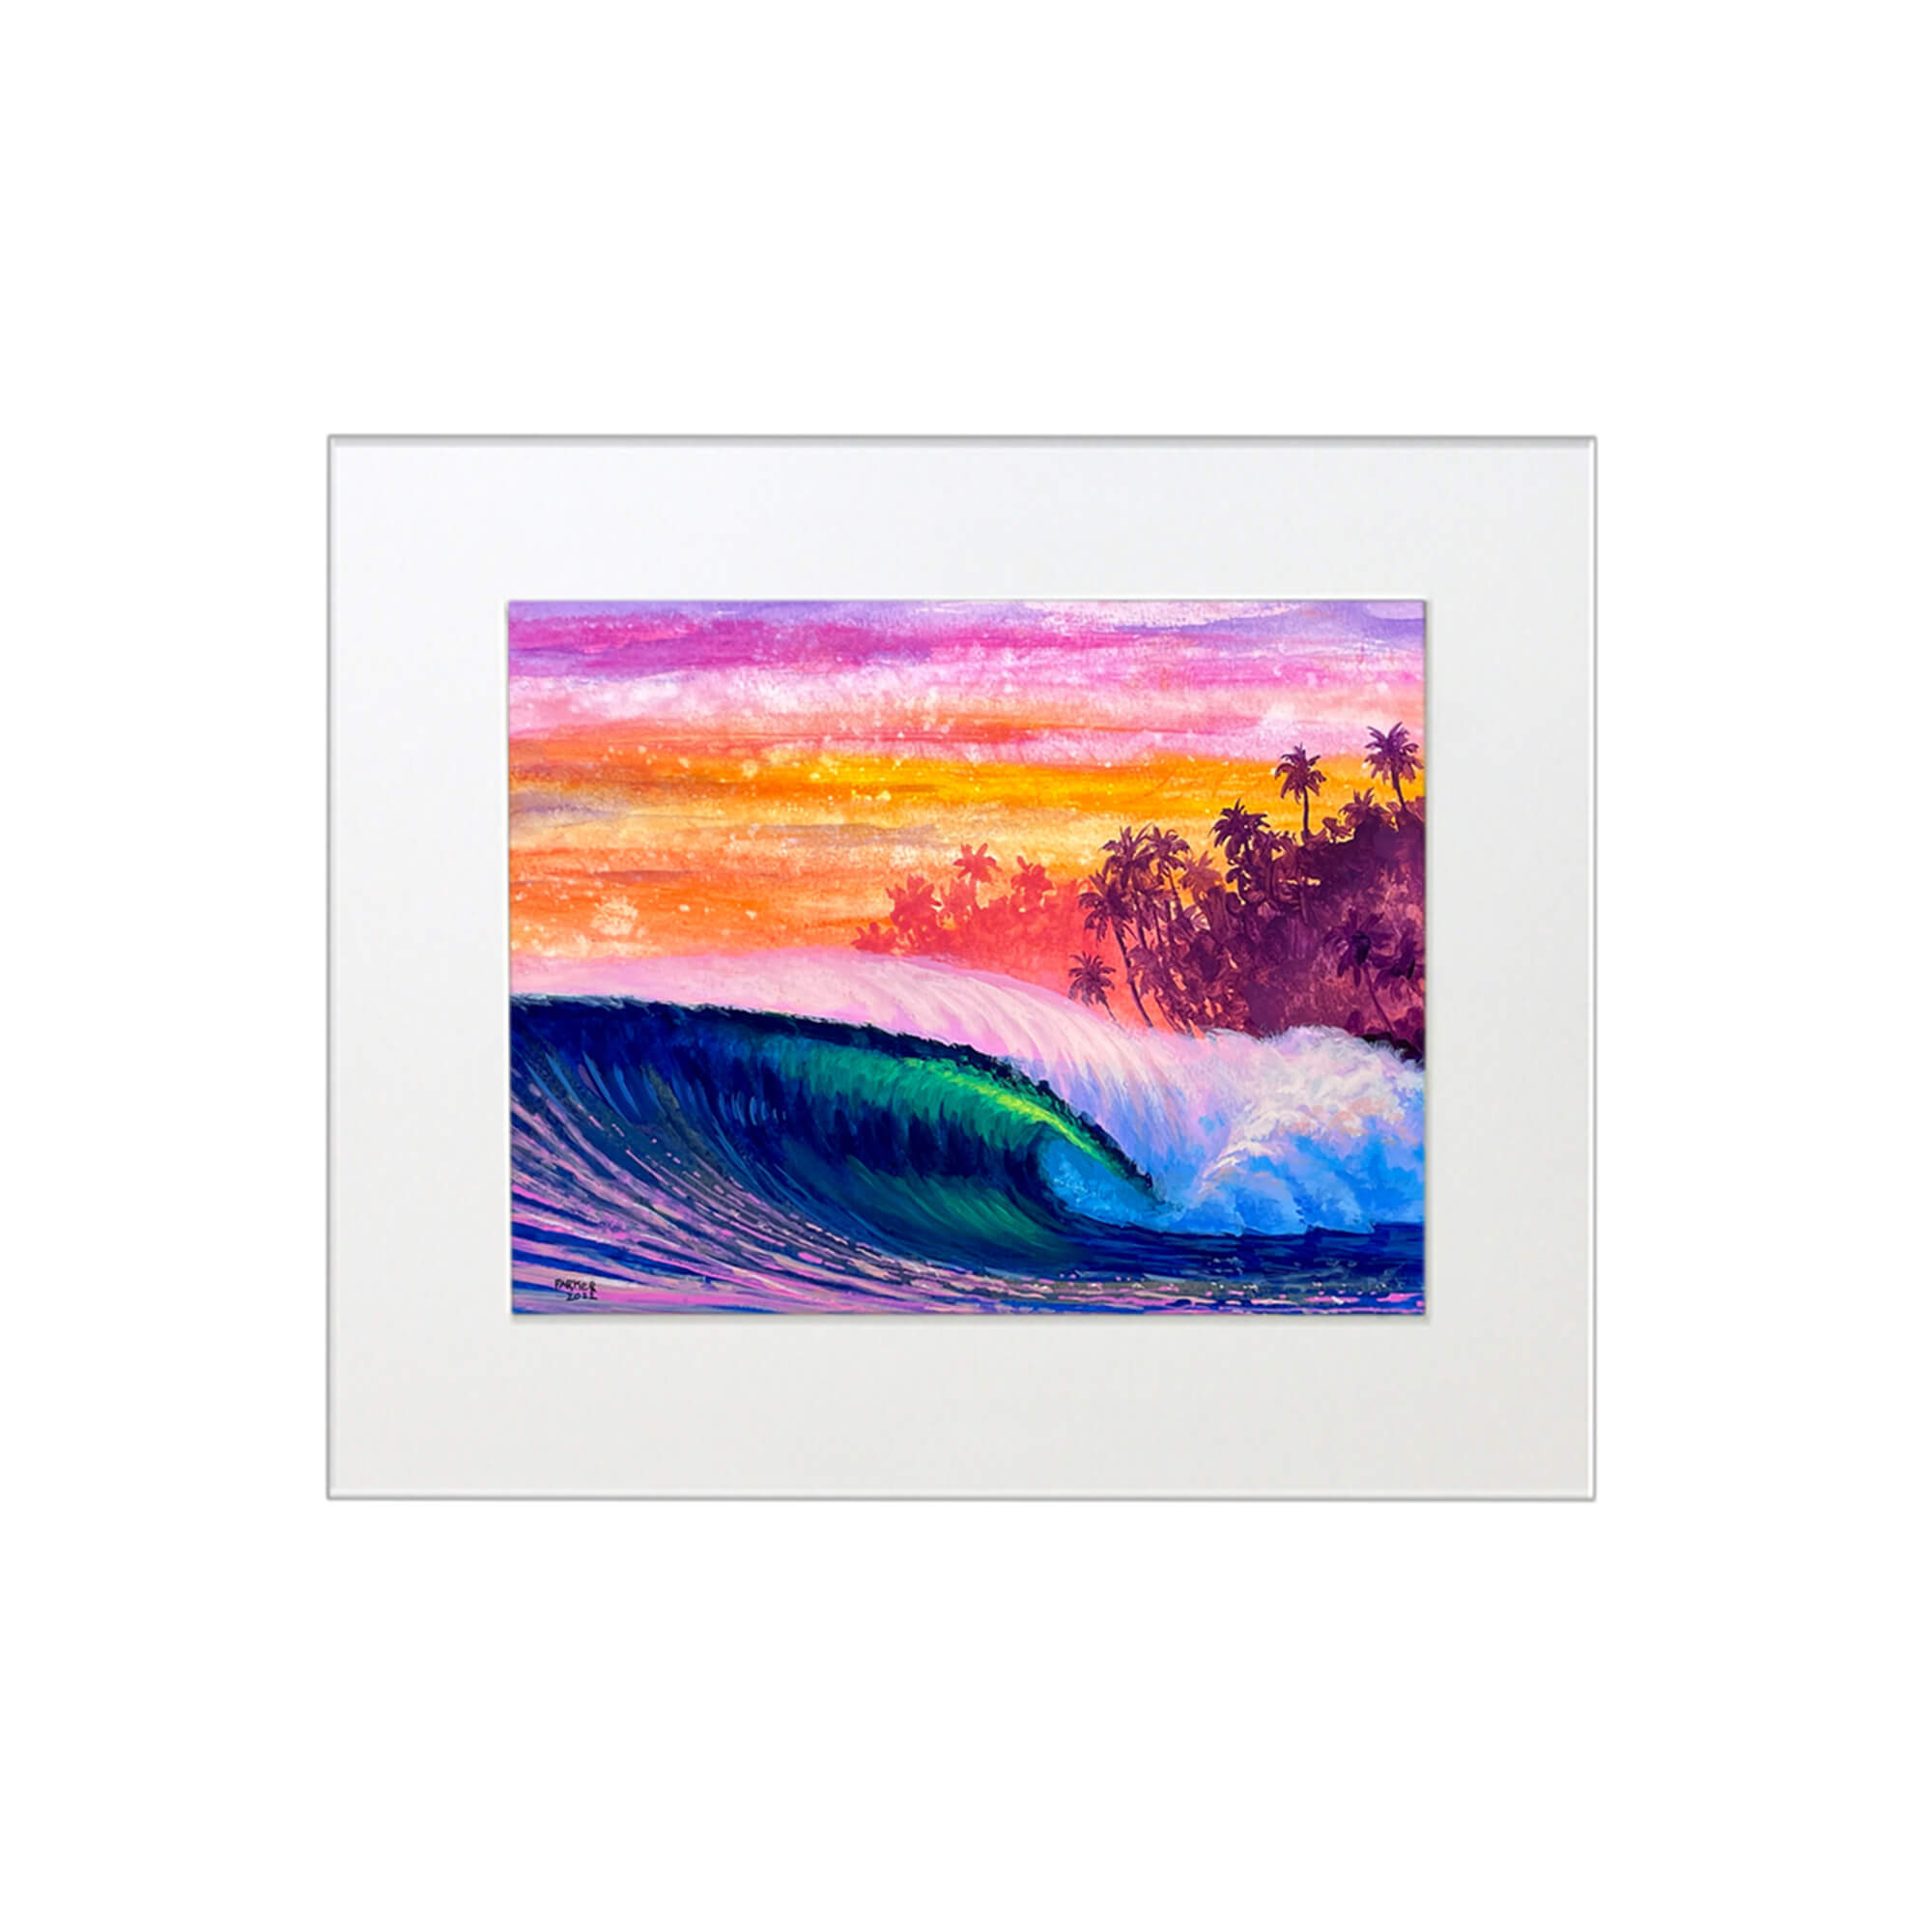 Vibrant blue barrel wave and colorful sunset by Hawaii artist Patrick Parker